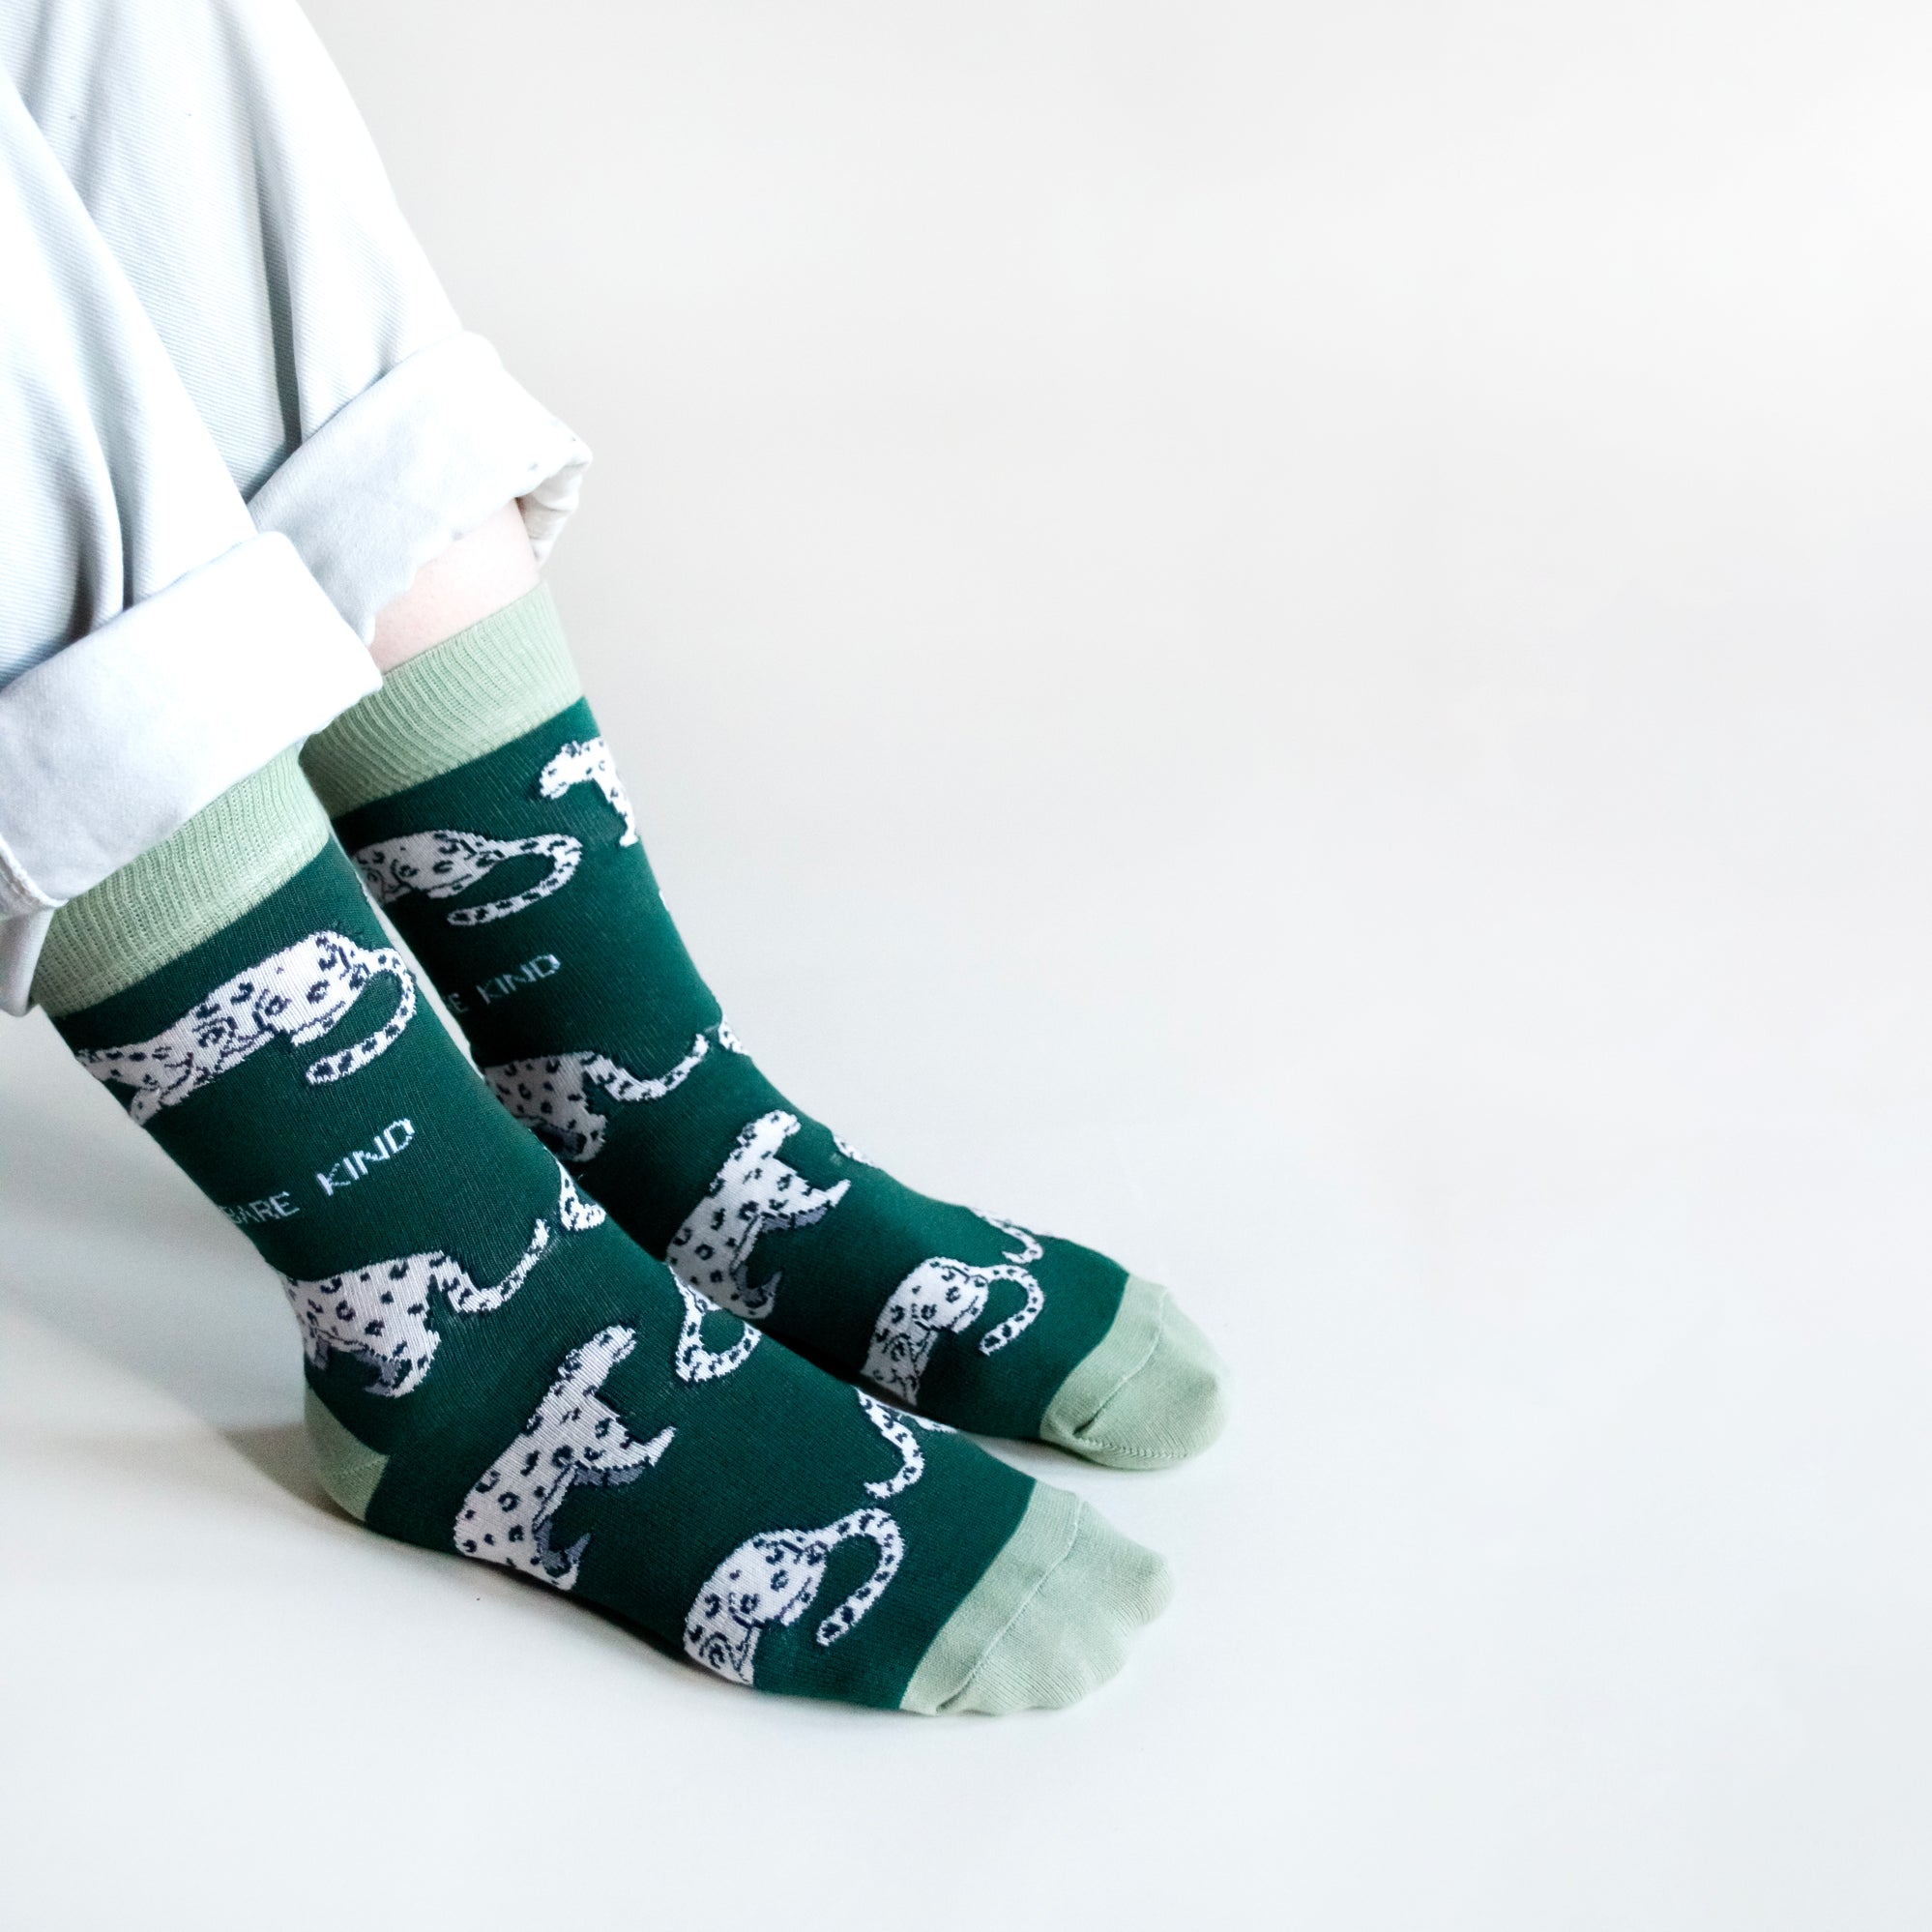 Bare Kind Bamboo Socks Adults – Snow Leopards